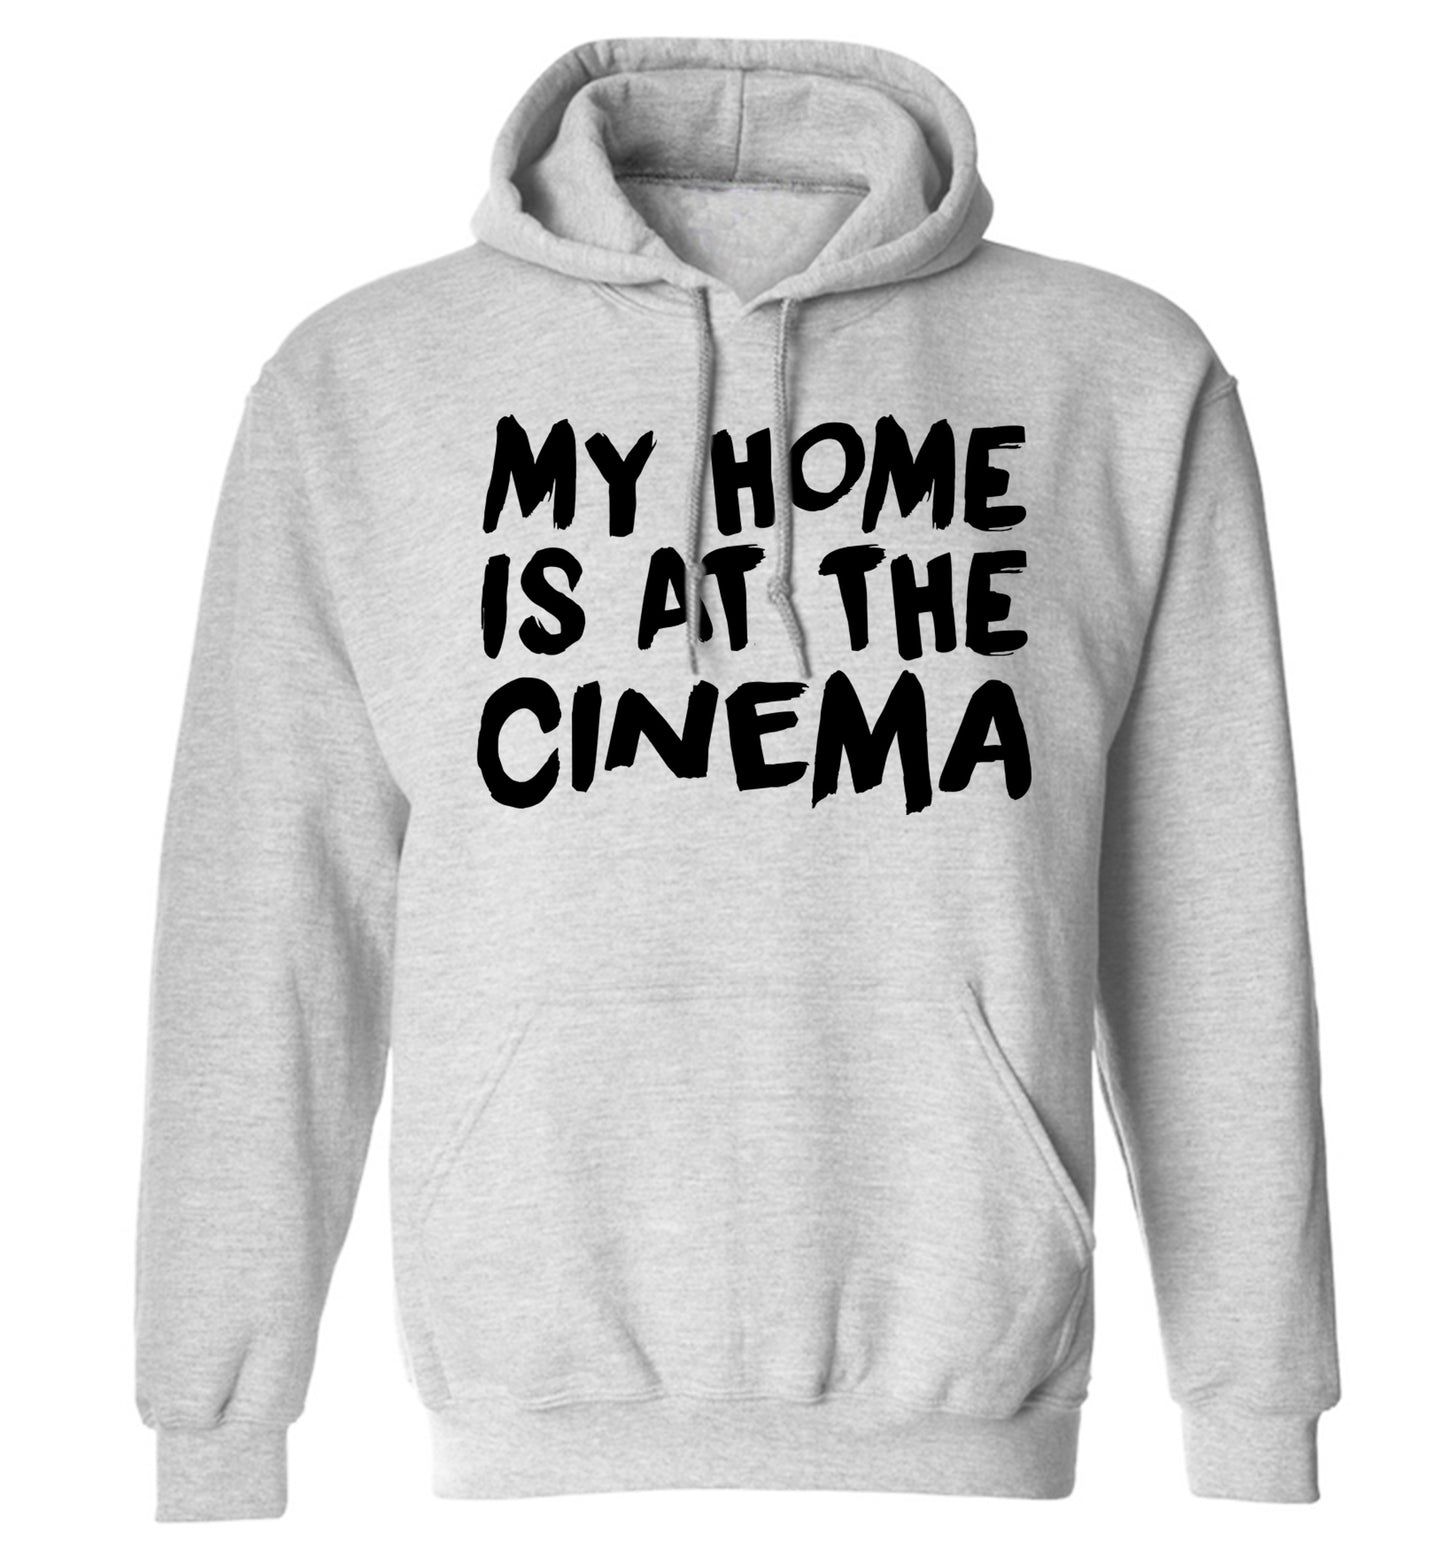 My home is at the cinema adults unisex grey hoodie 2XL